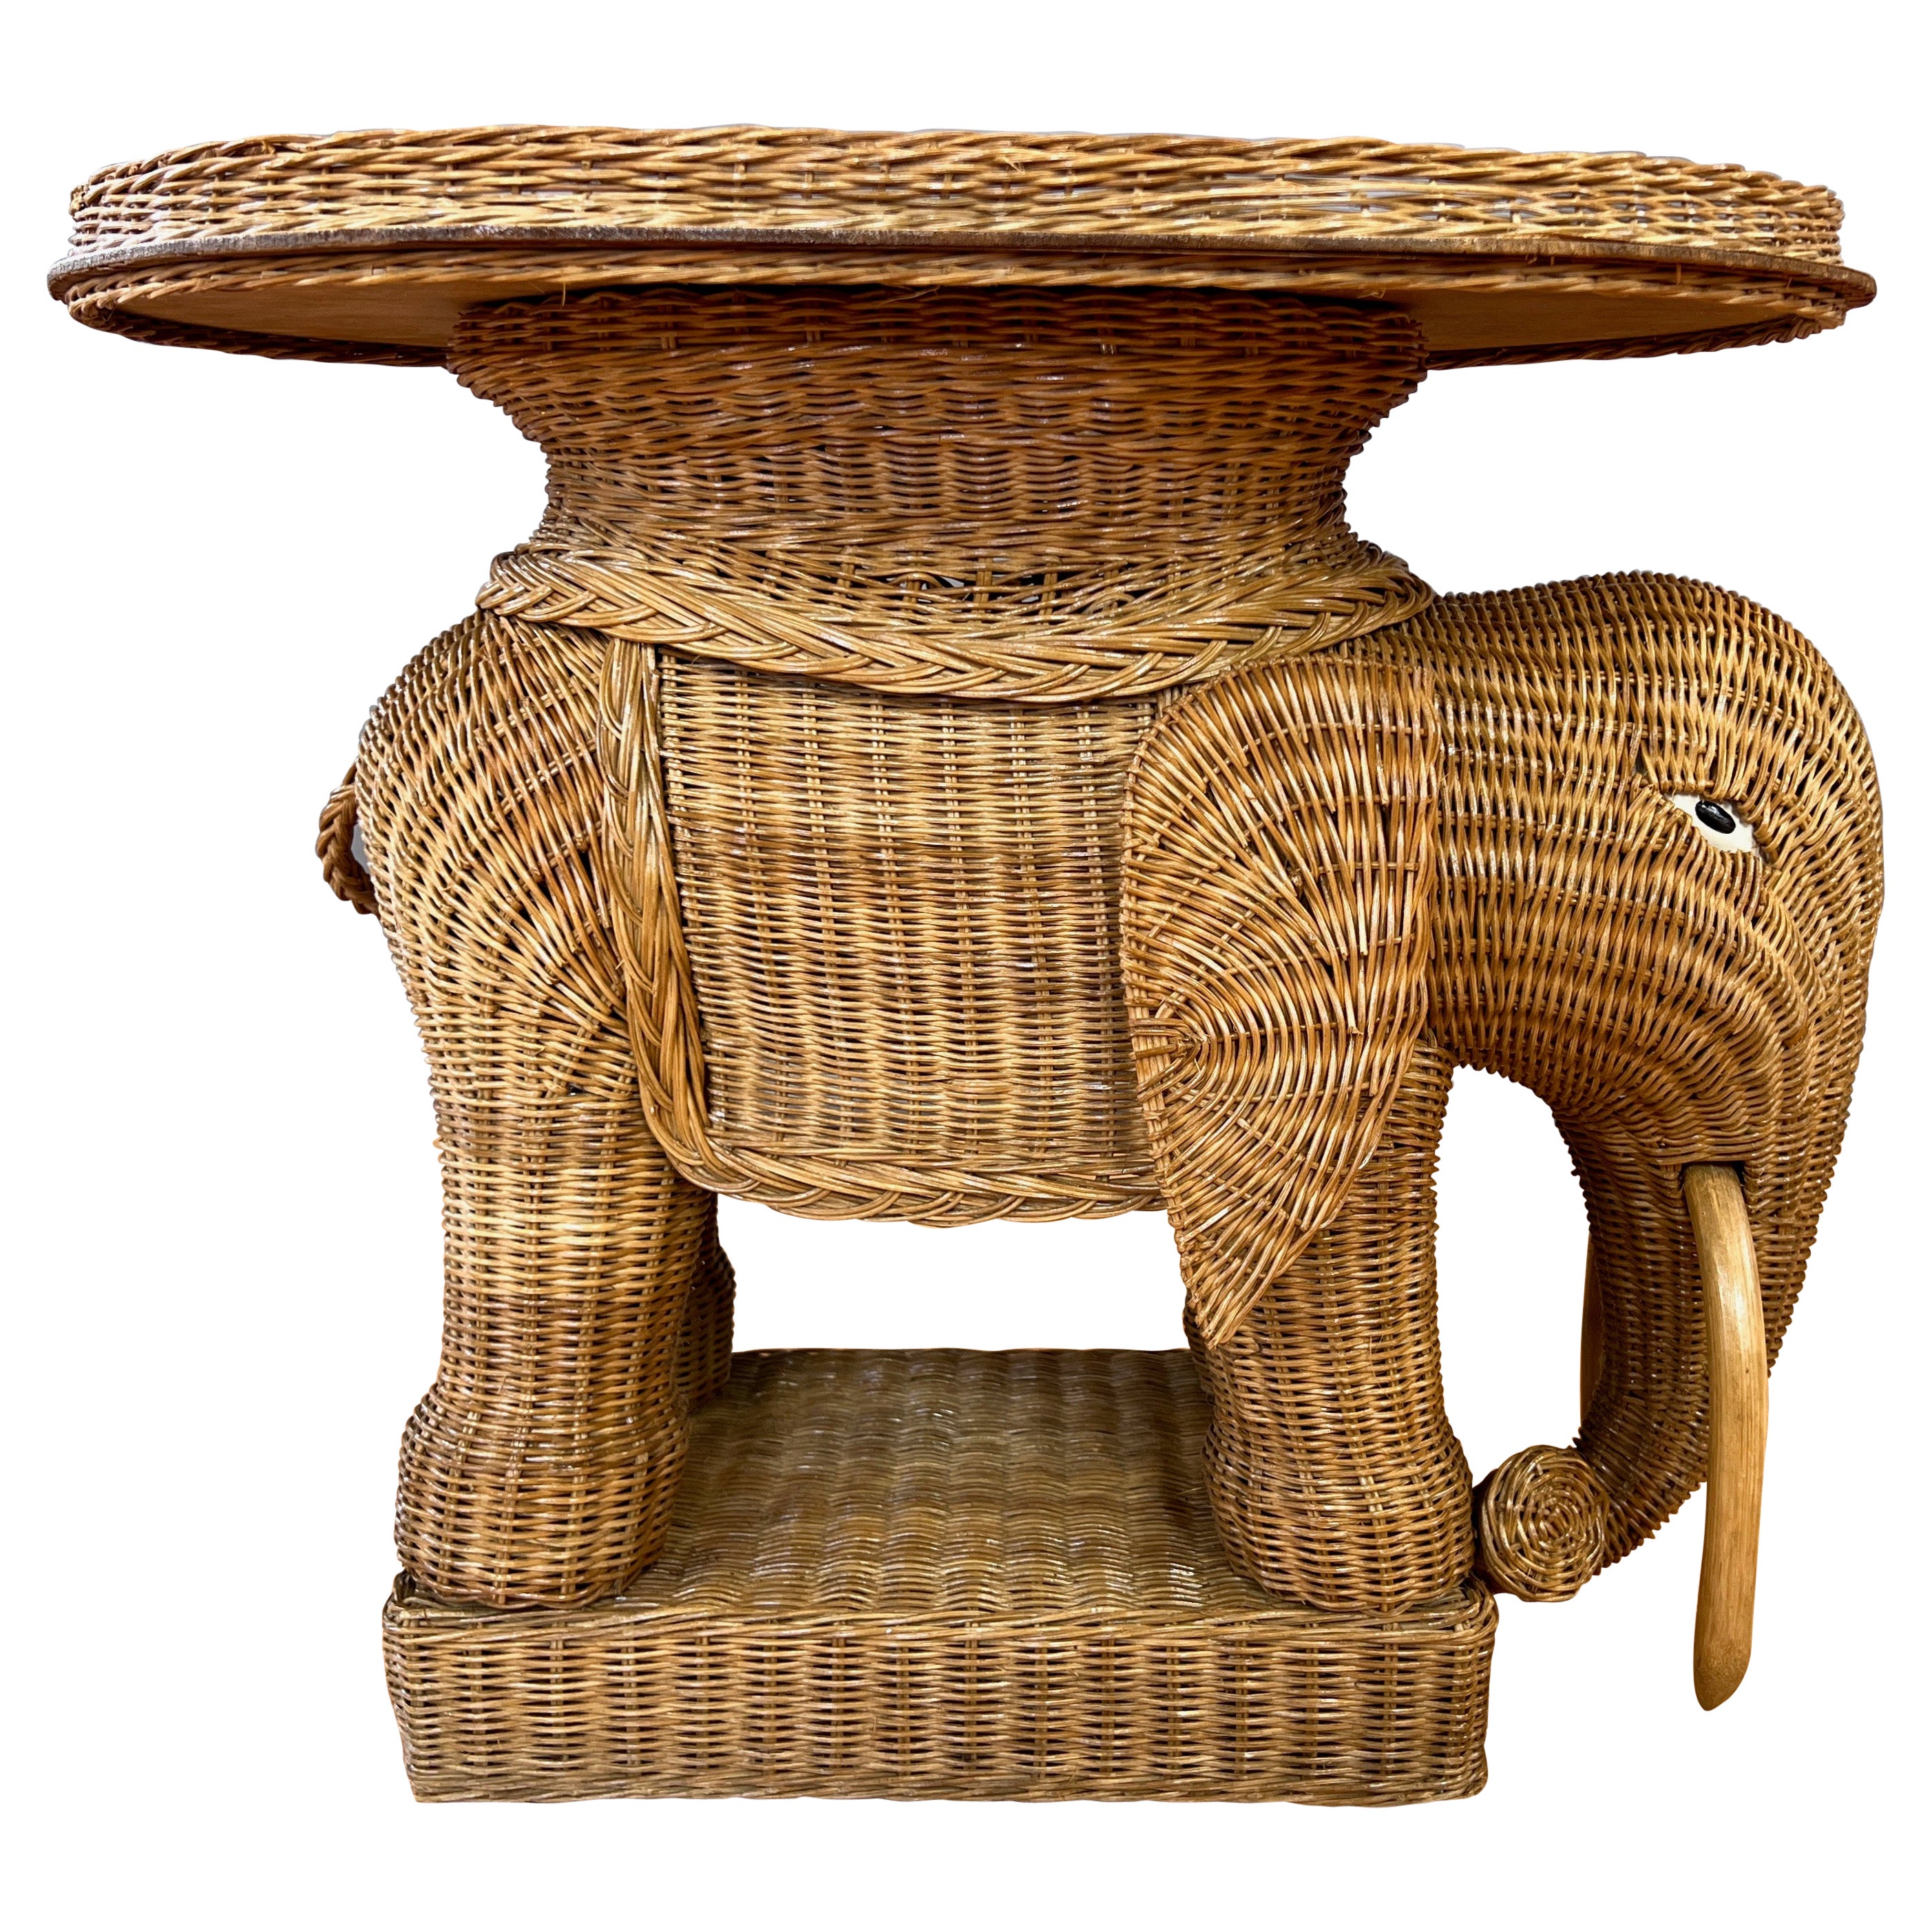 Vintage Boho Chic Natural Wicker & Rattan Elephant Side Table with Tray, 1970s